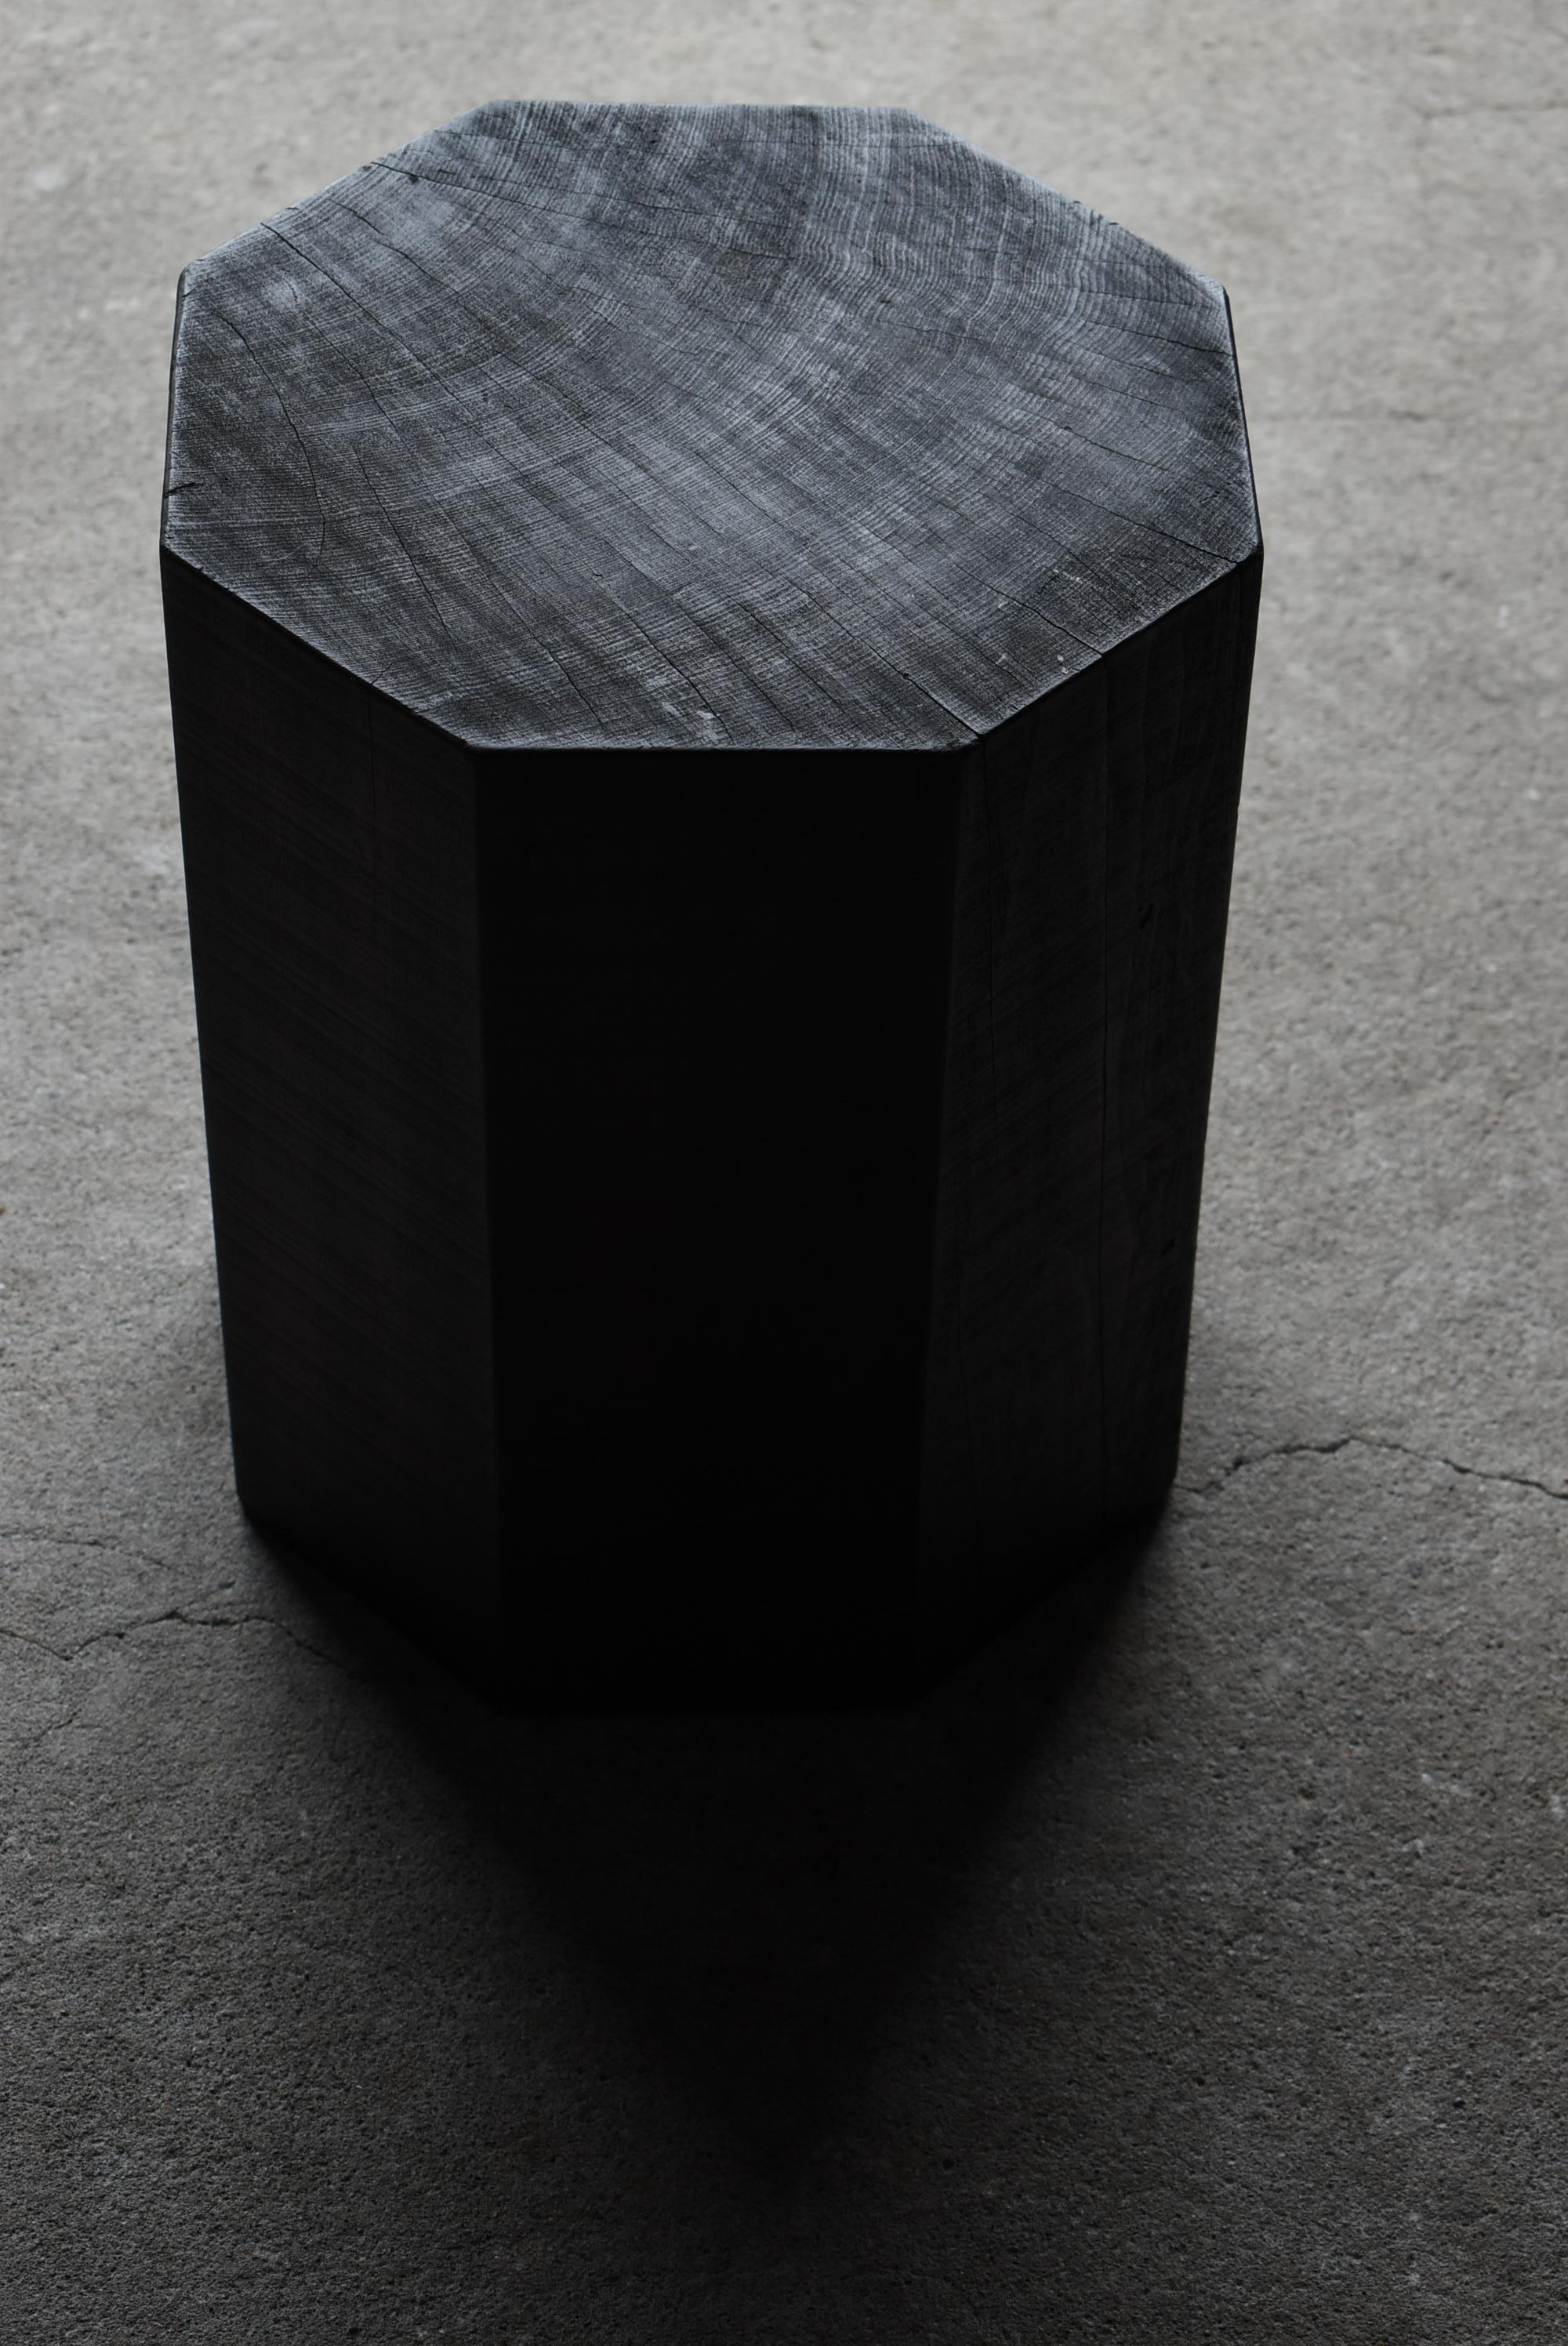 Mid-20th Century Japanese Old Octagon Wood Block 1940s-1960s / Side Table Stool Wabisabi For Sale